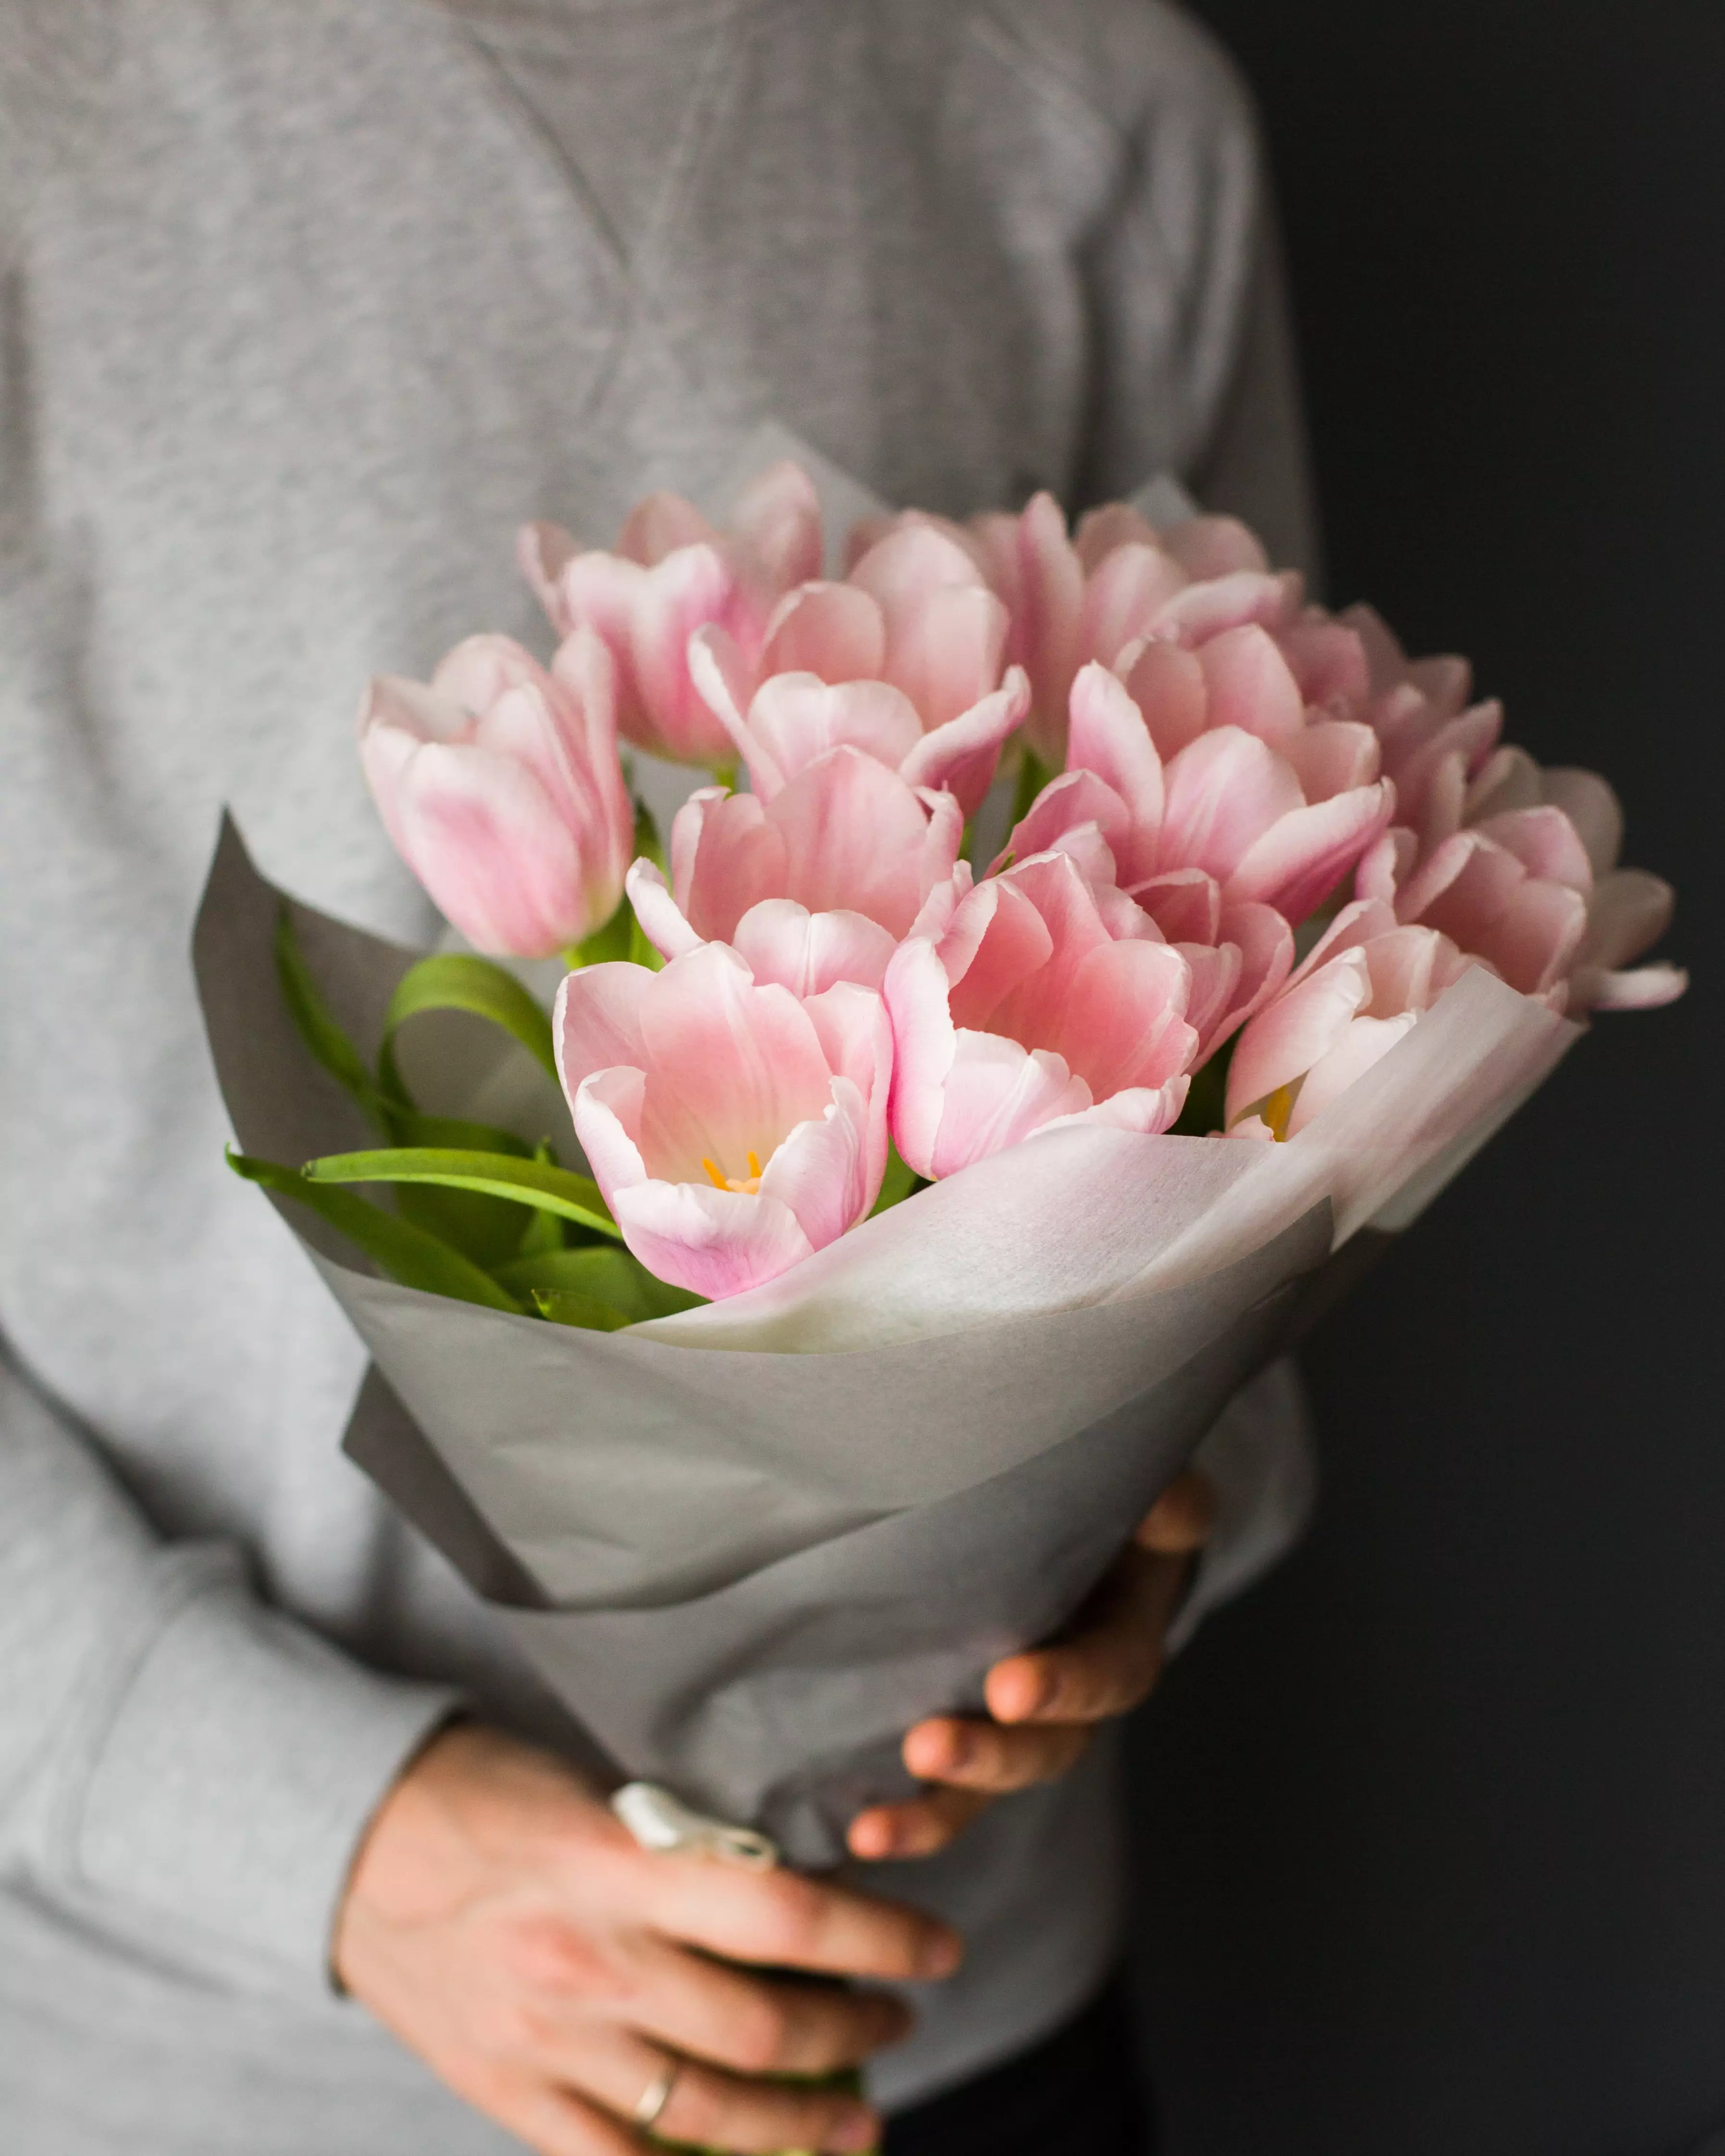 A bouquet of flowers is usually the more 'traditional' Mother's Day gift choice (